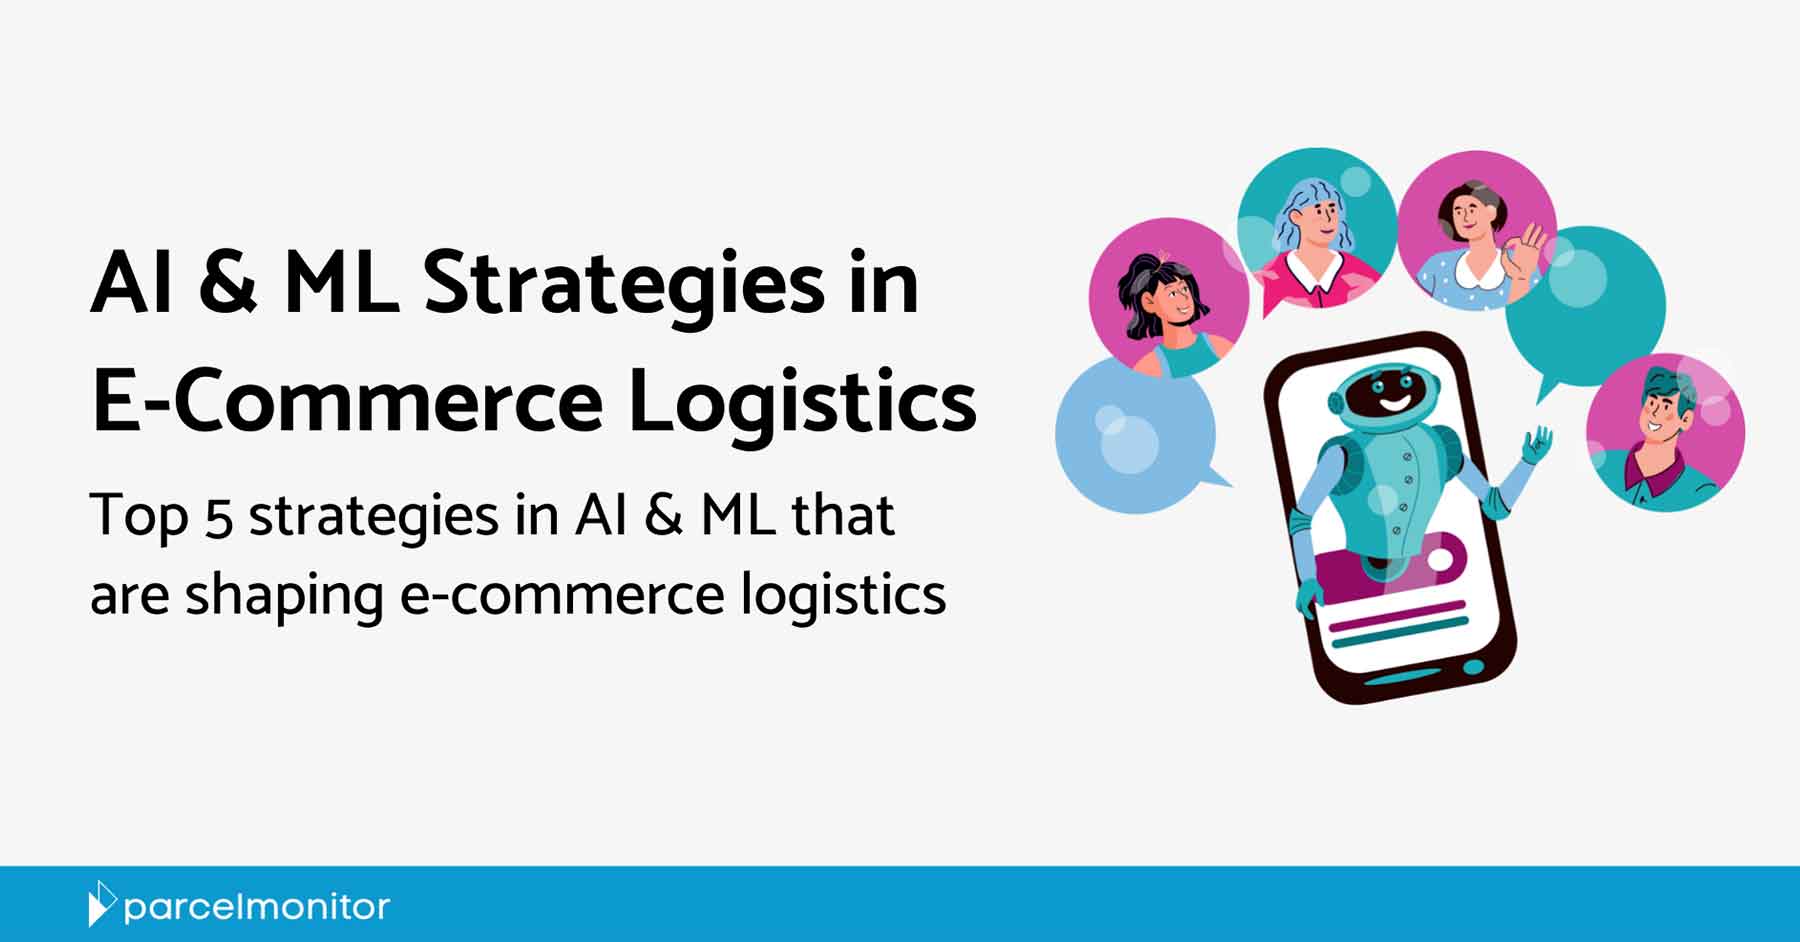 Parcel Monitor: Top 5 AL & ML Strategies in E-commerce Logistics Featured Image